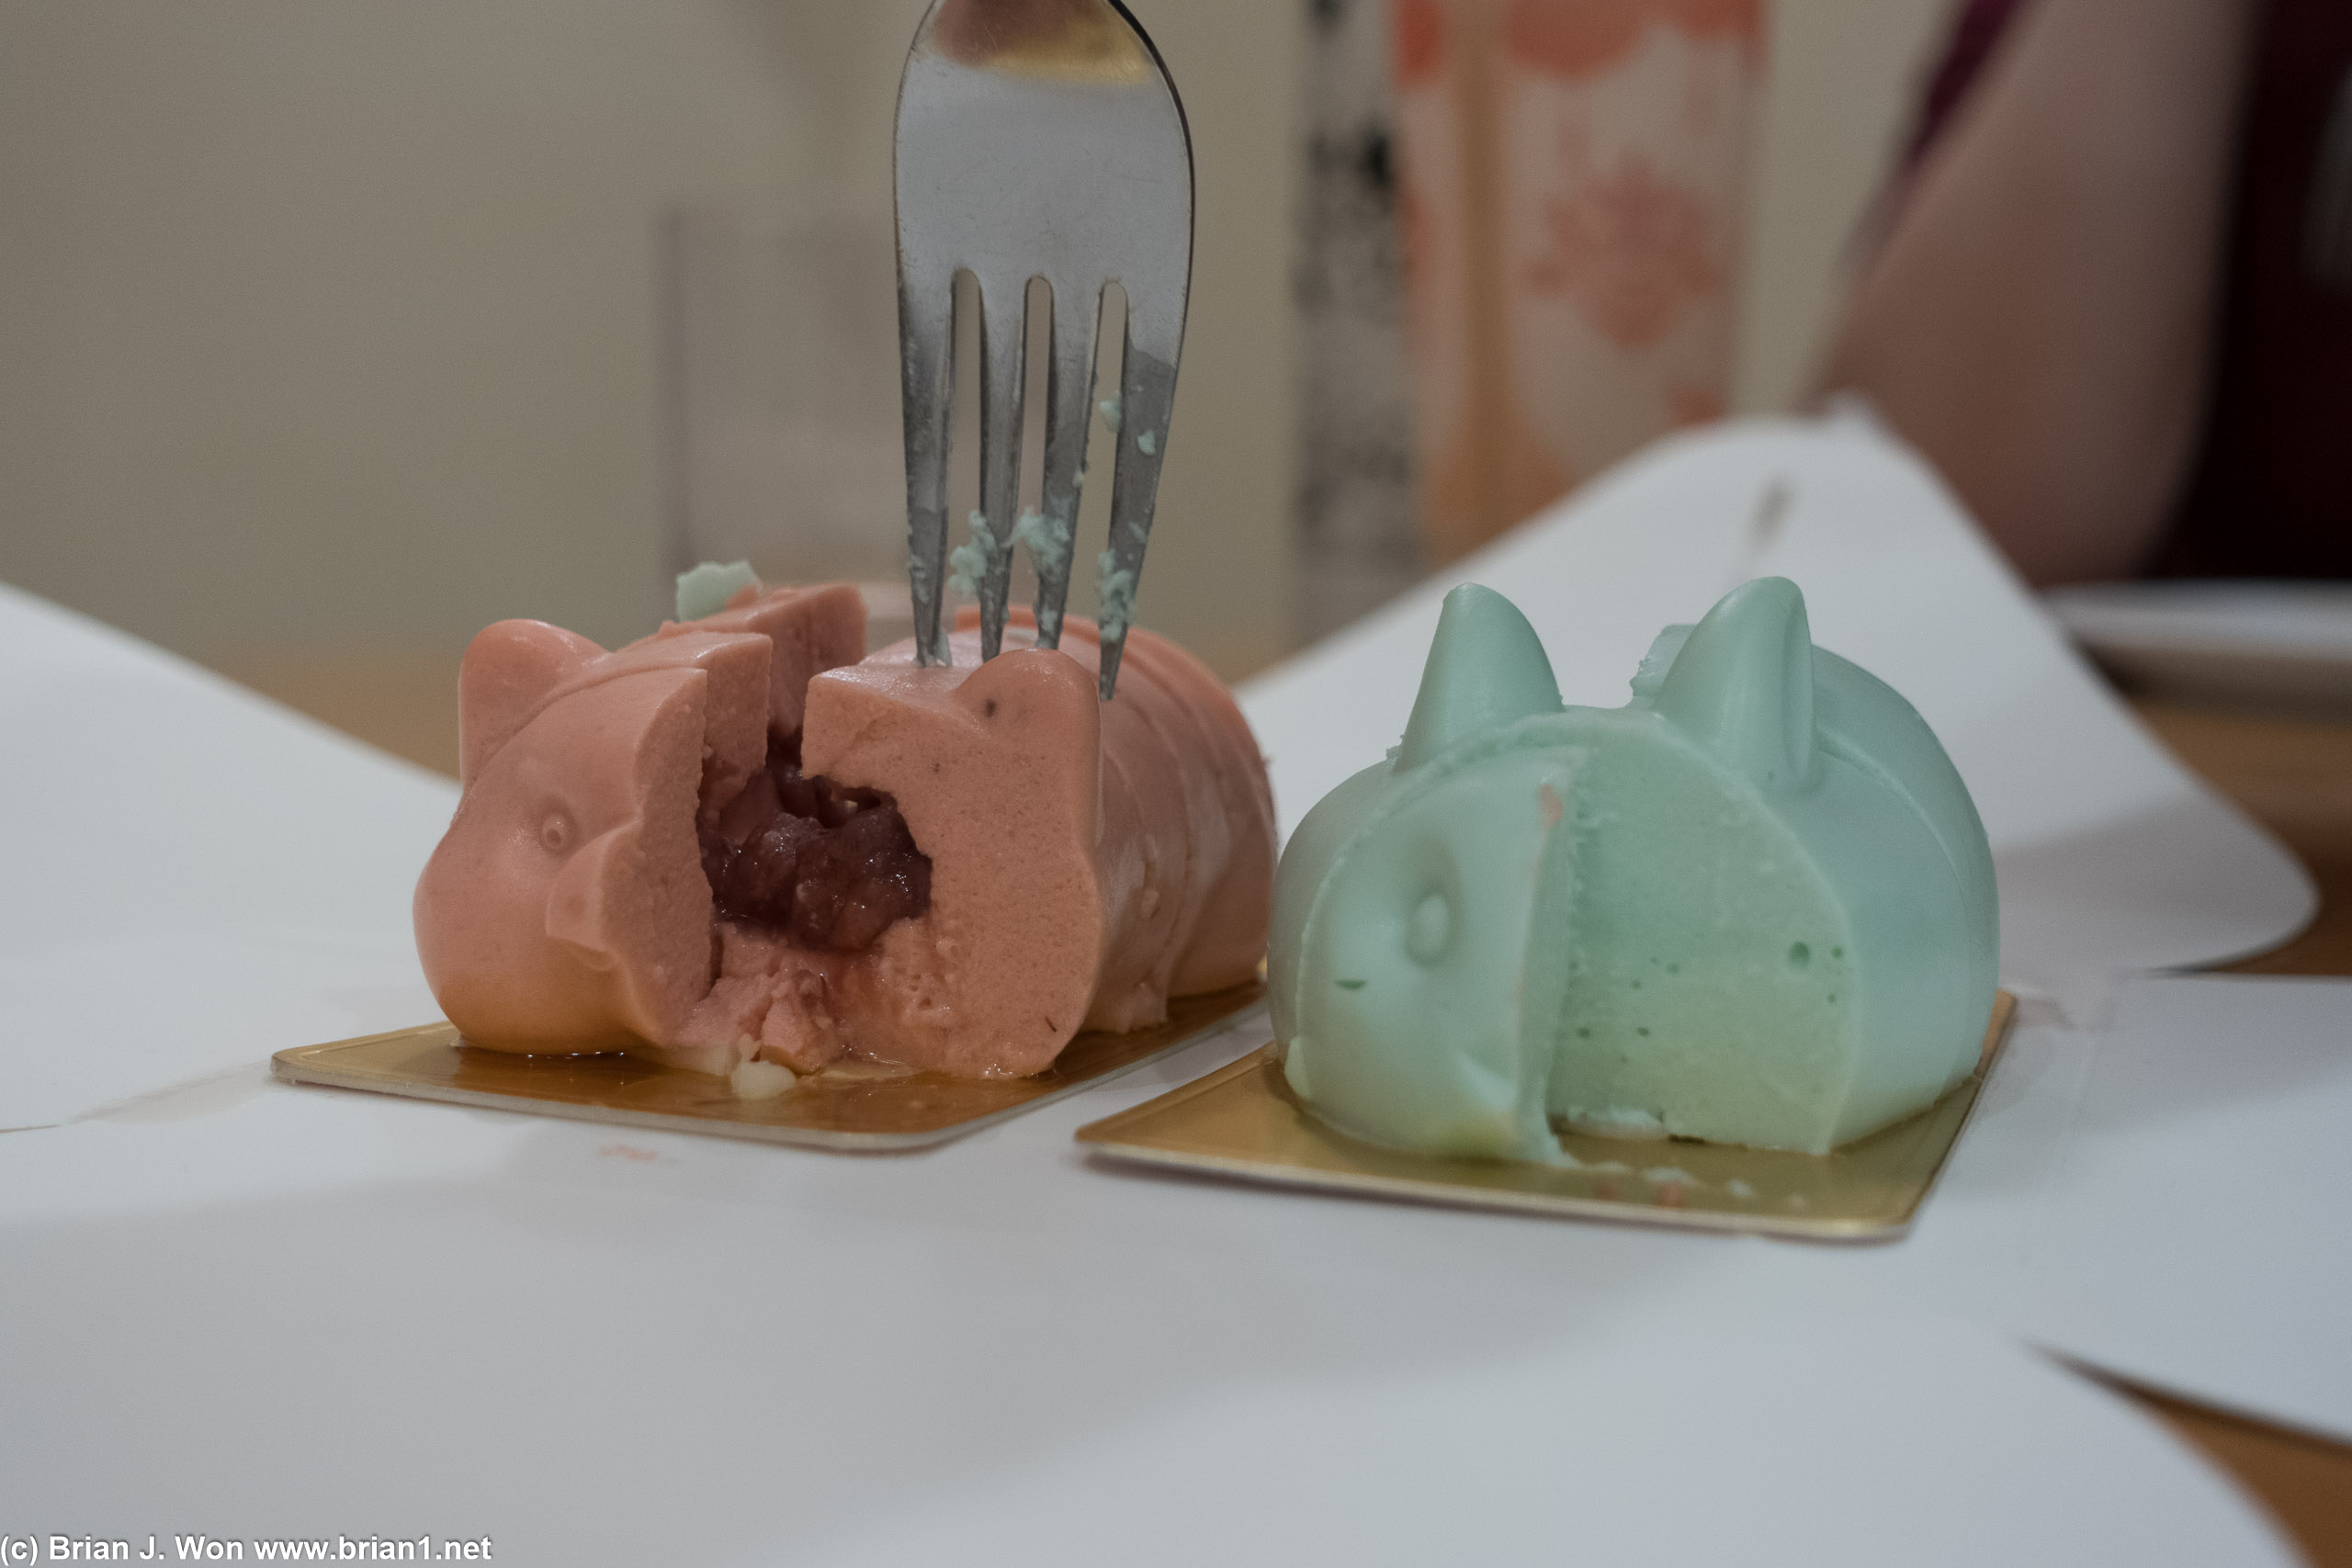 Confirmed, pig is red bean filled. They look so sad now.